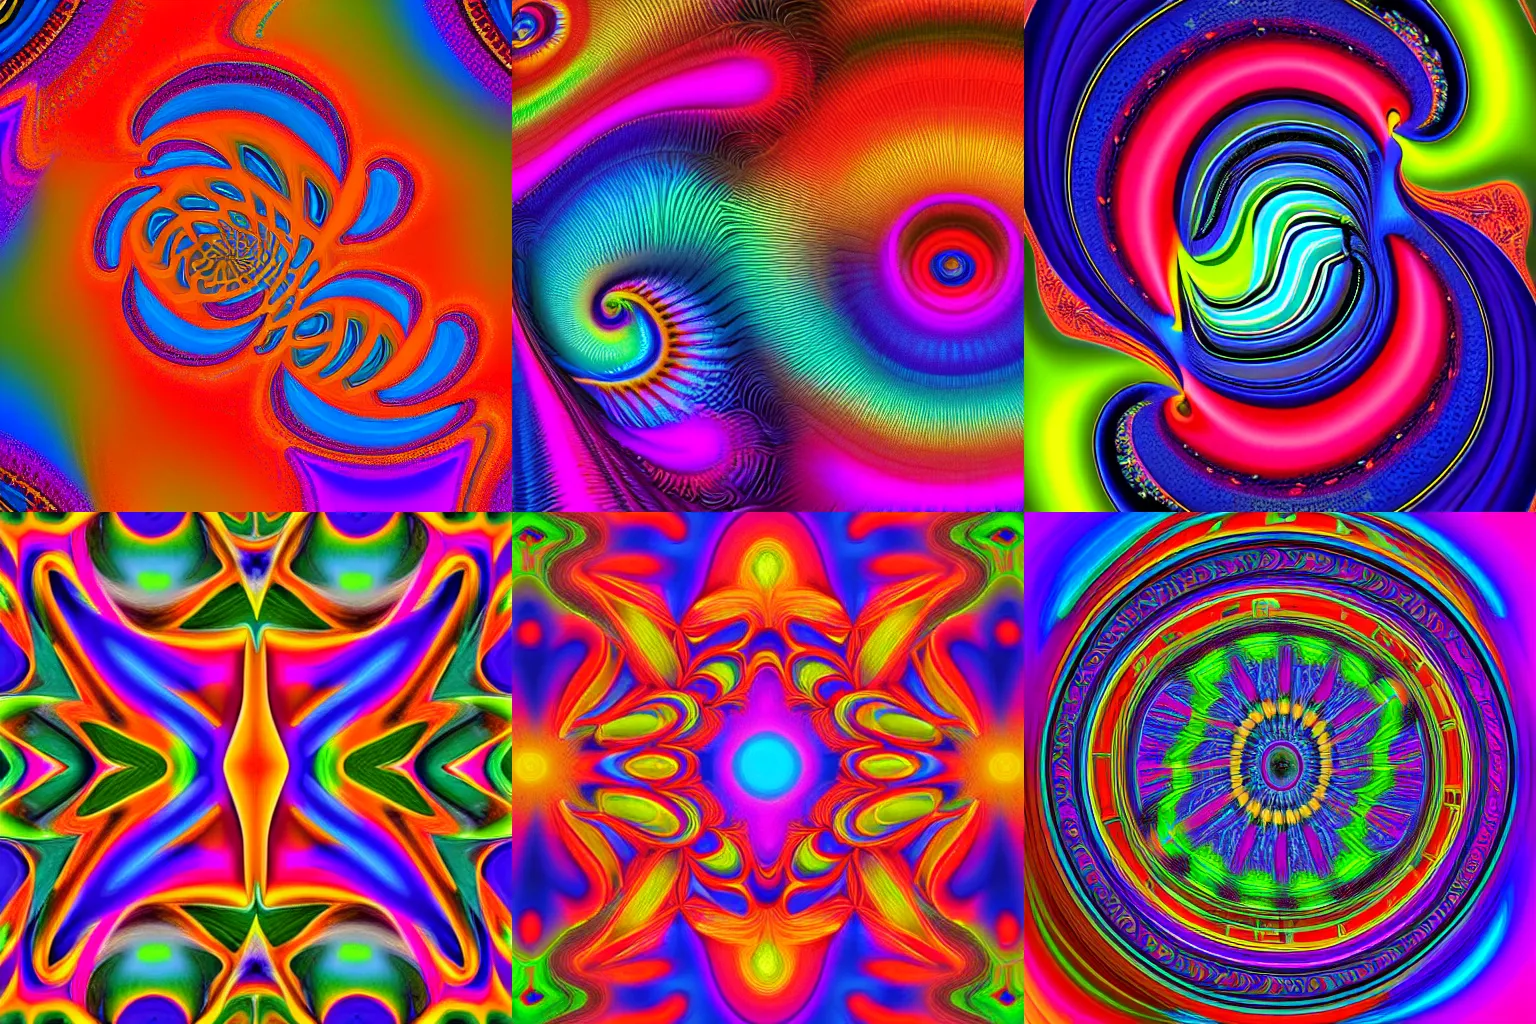 Prompt: an eclectic mix of colorful abstract shapes and patterns, psychedelic, digital art, trippy, optical illusion, mind-bending, vibrant, Fractal Art, DeviantArt, abstract, shapes, patterns, colorful, psychedelic, digital art, trippy, optical illusion, mind-bending, vibrant, Fractal Art, DeviantArt, abstract, shapes, patterns, colorful